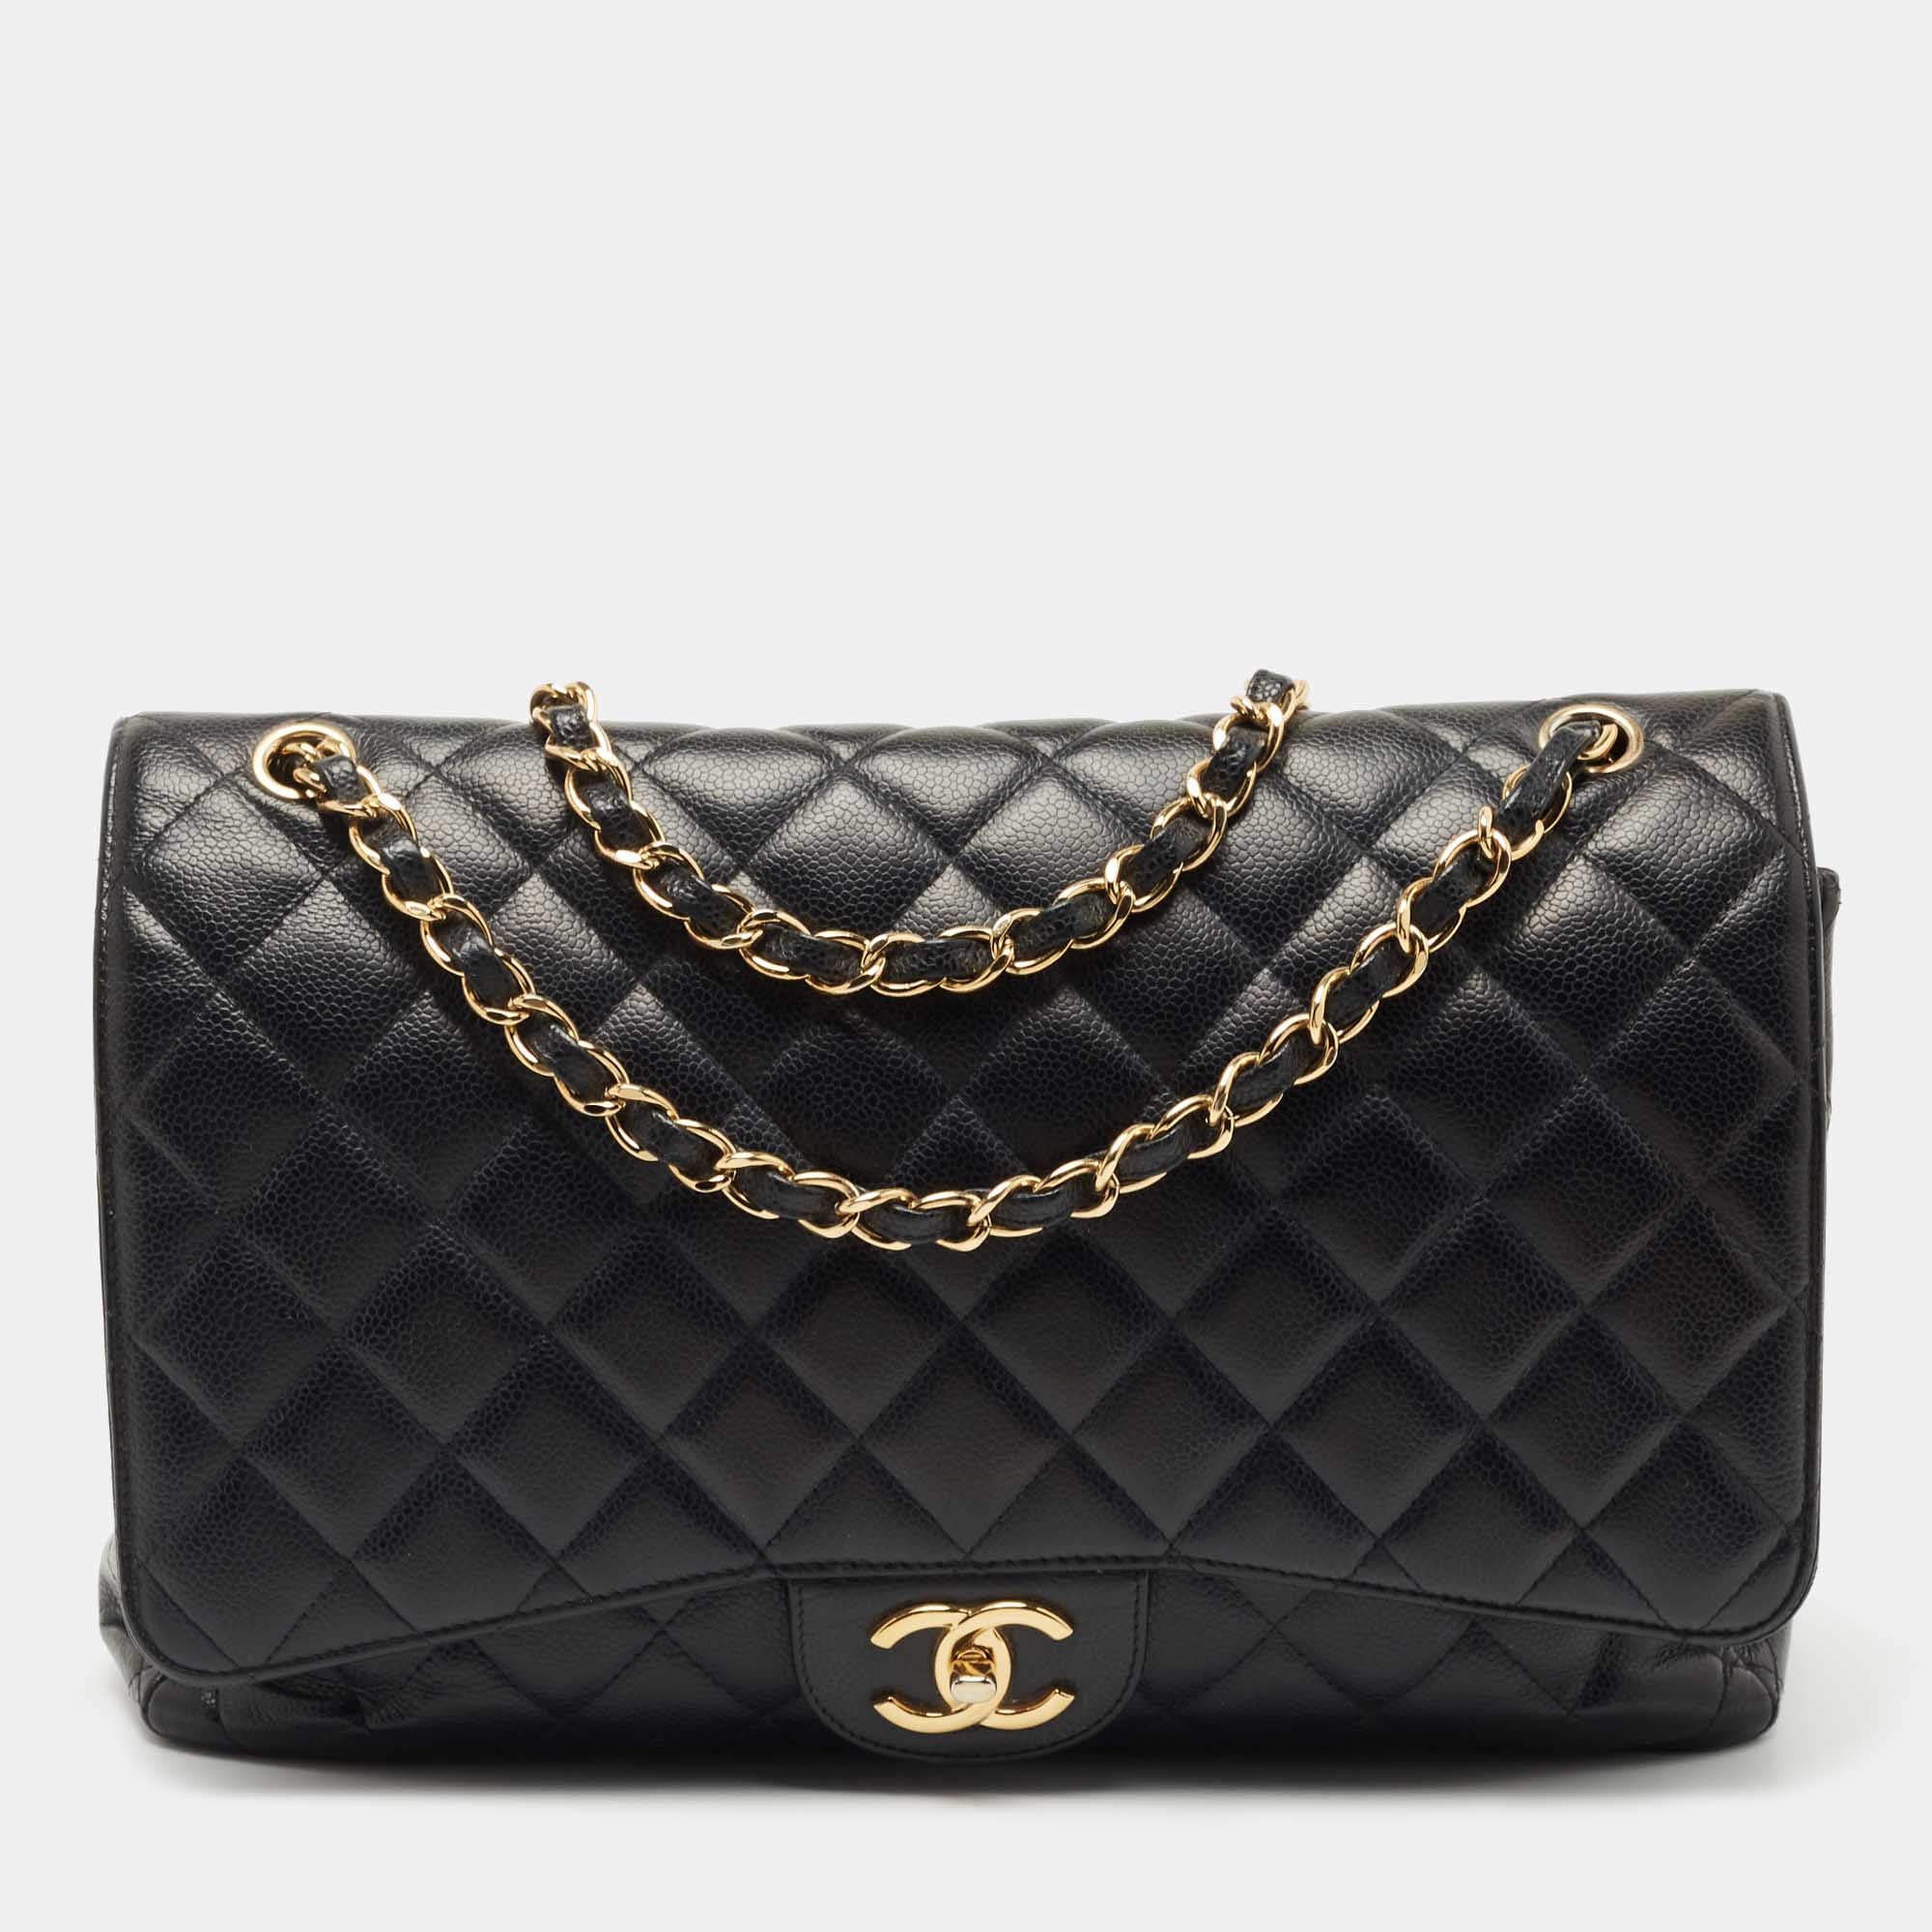 CHANEL Paris Limited Quilted W Flap Turnlock Chain Shoulder Bag GHW Black  Z1490